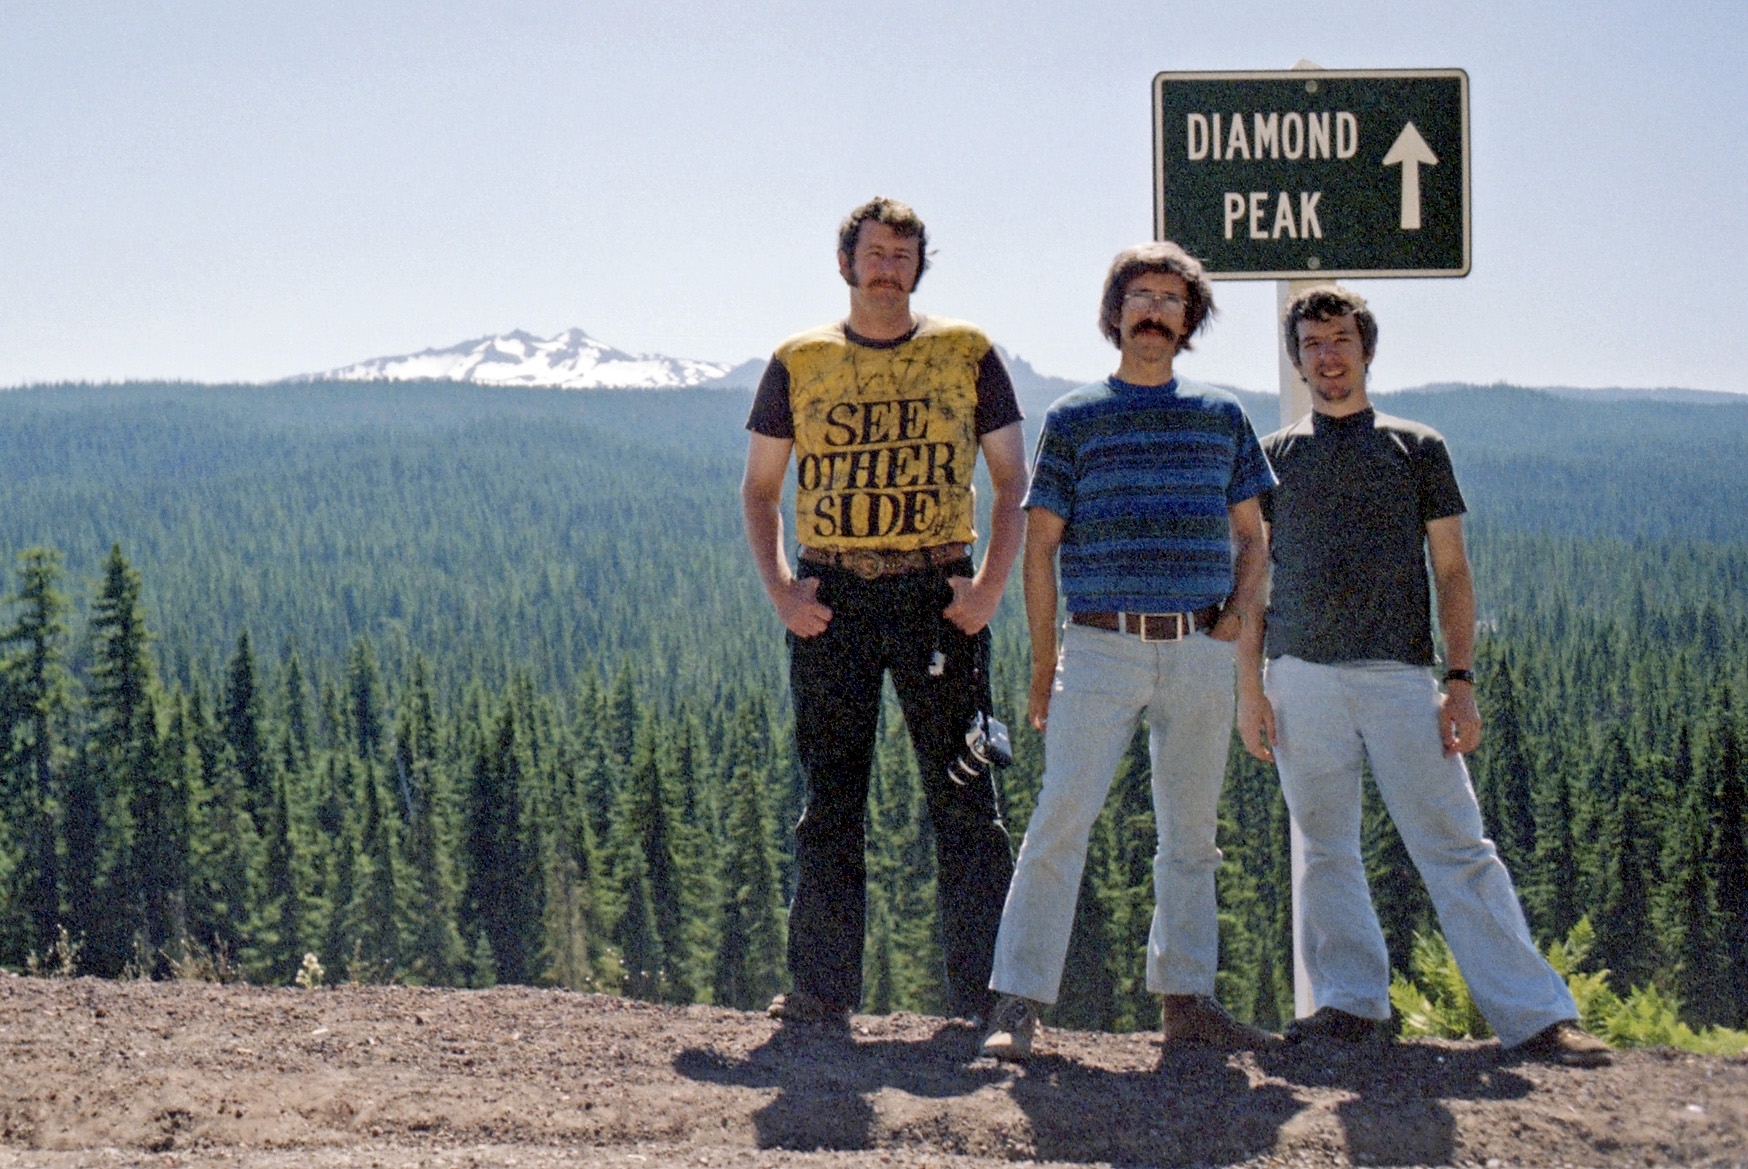 A companion to my Crater Lake photo, same trip, same guys: my friend, my brother, me. In Oregon, near some big mountain or other. Trying to remember the name... don't tell me, it'll come to me... View full size.